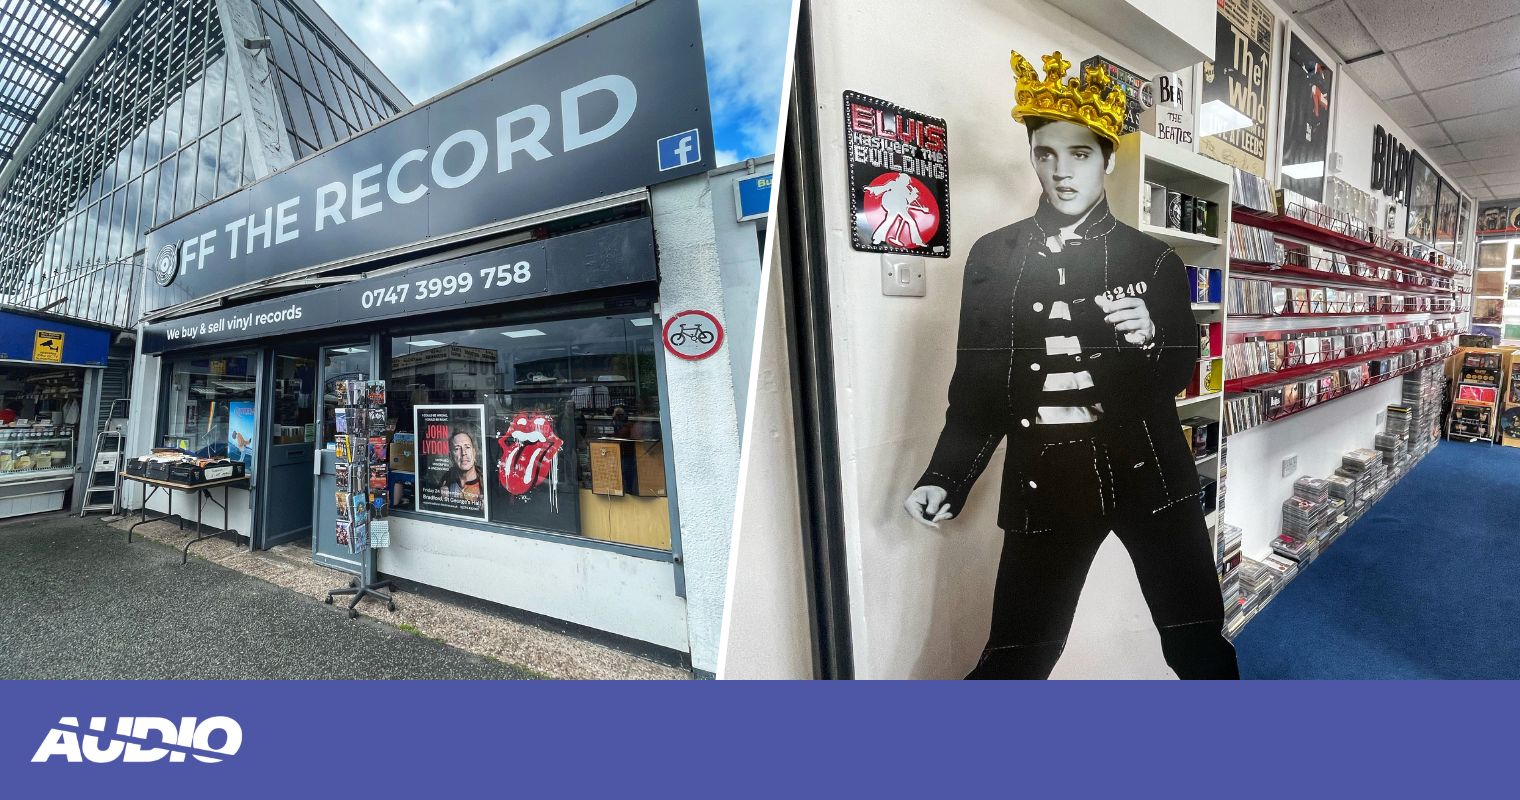 The new Elvis-obsessed record shop on Bury Market selling old-school rock and indie favourites